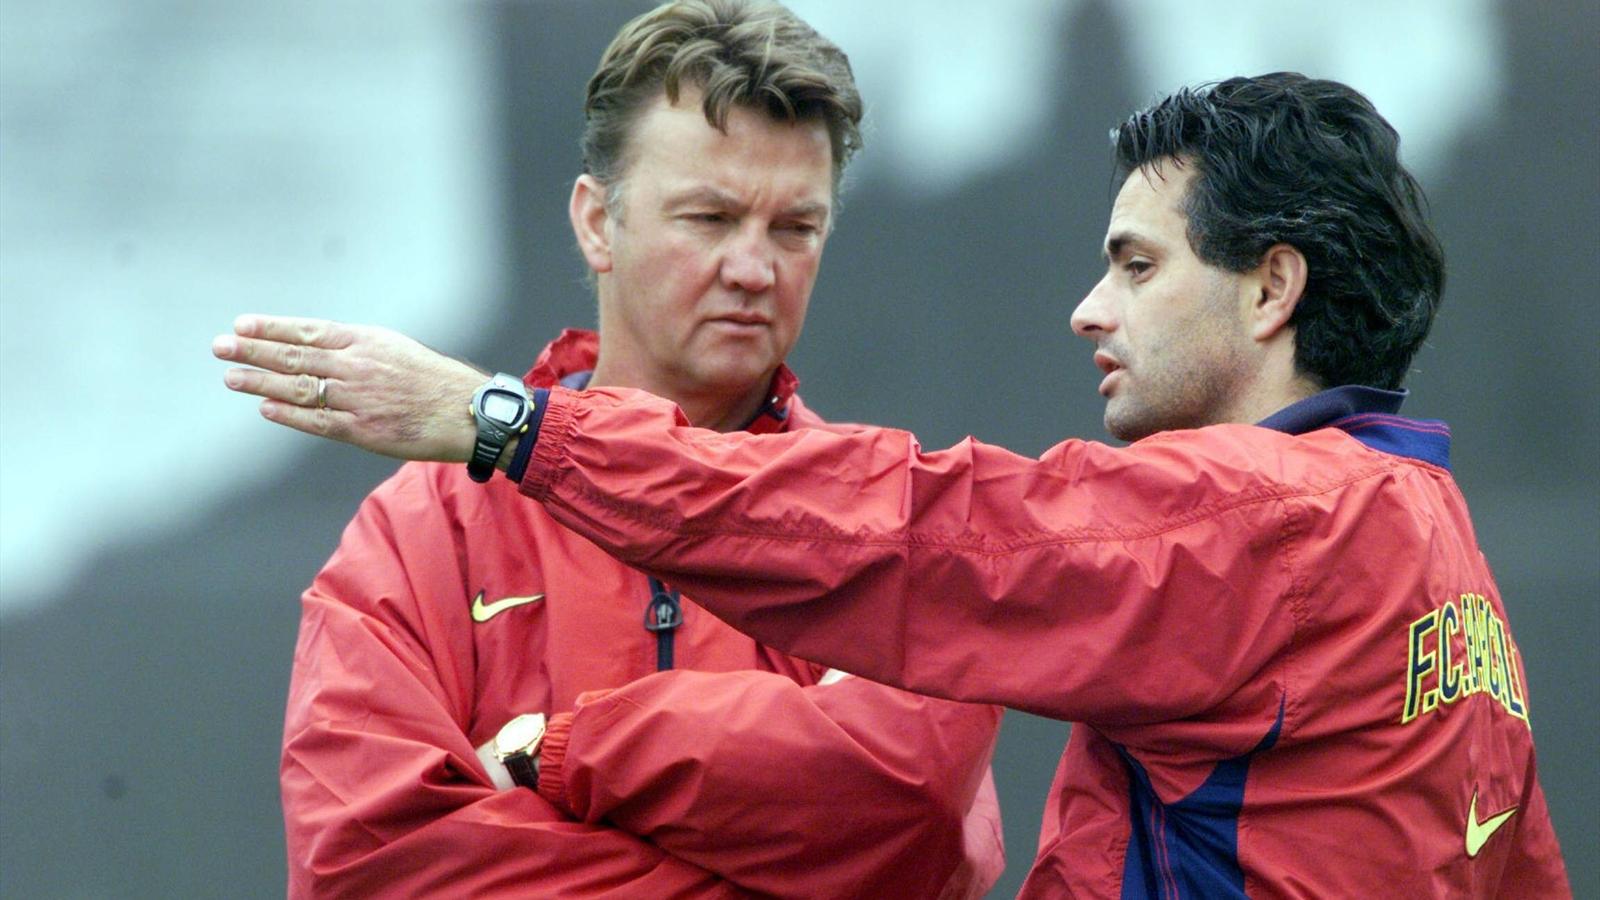 TheFootyBlog.net » Why I Adore The Mourinho And Van Gaal Love In!